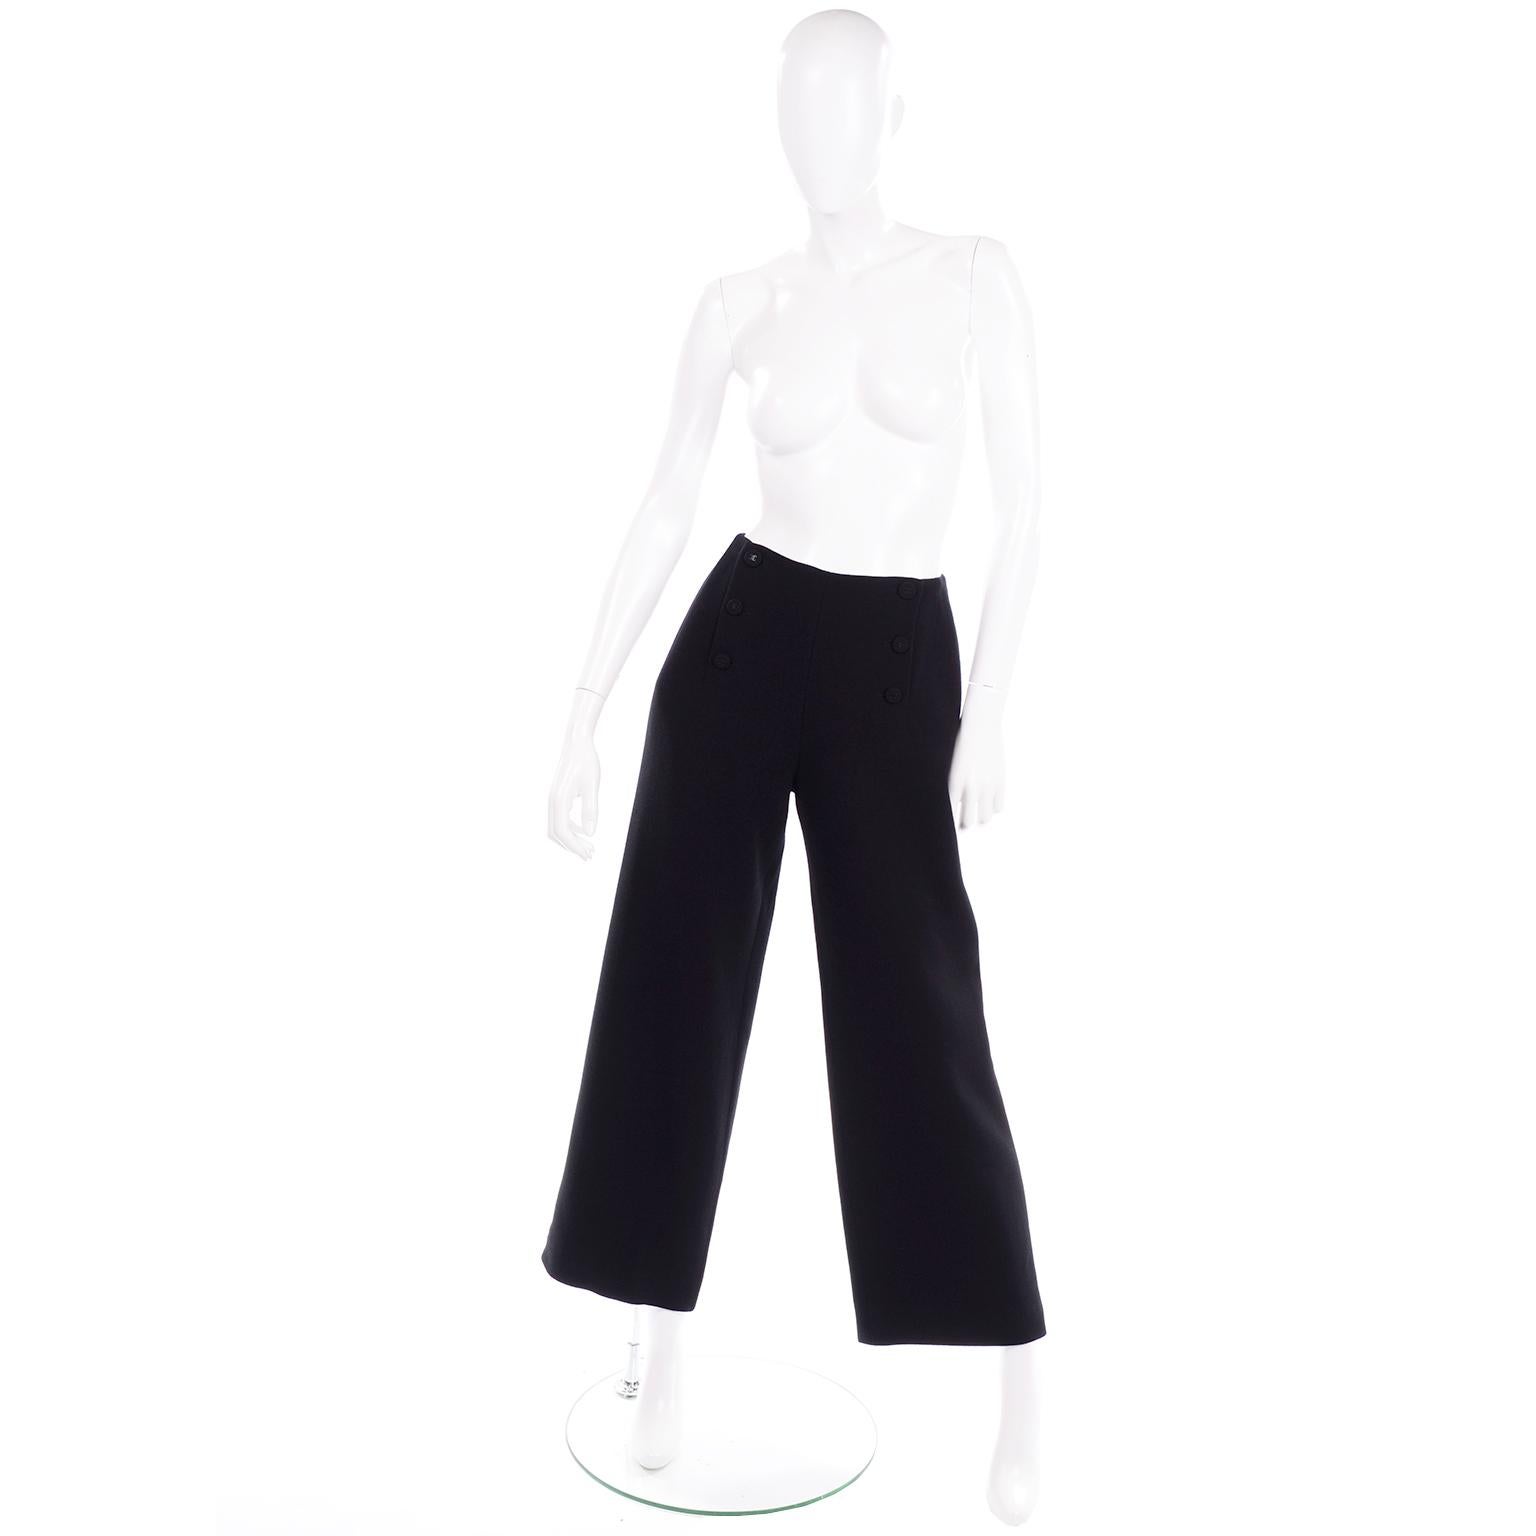 We love these Chanel Pants! These gorgeous Chanel pants are styled like vintage 1940's sailor pants with rows of cc monogram logo buttons on the front, a high waist and wide legs. The pants are 100% wool with beautiful silk lining.  They are in